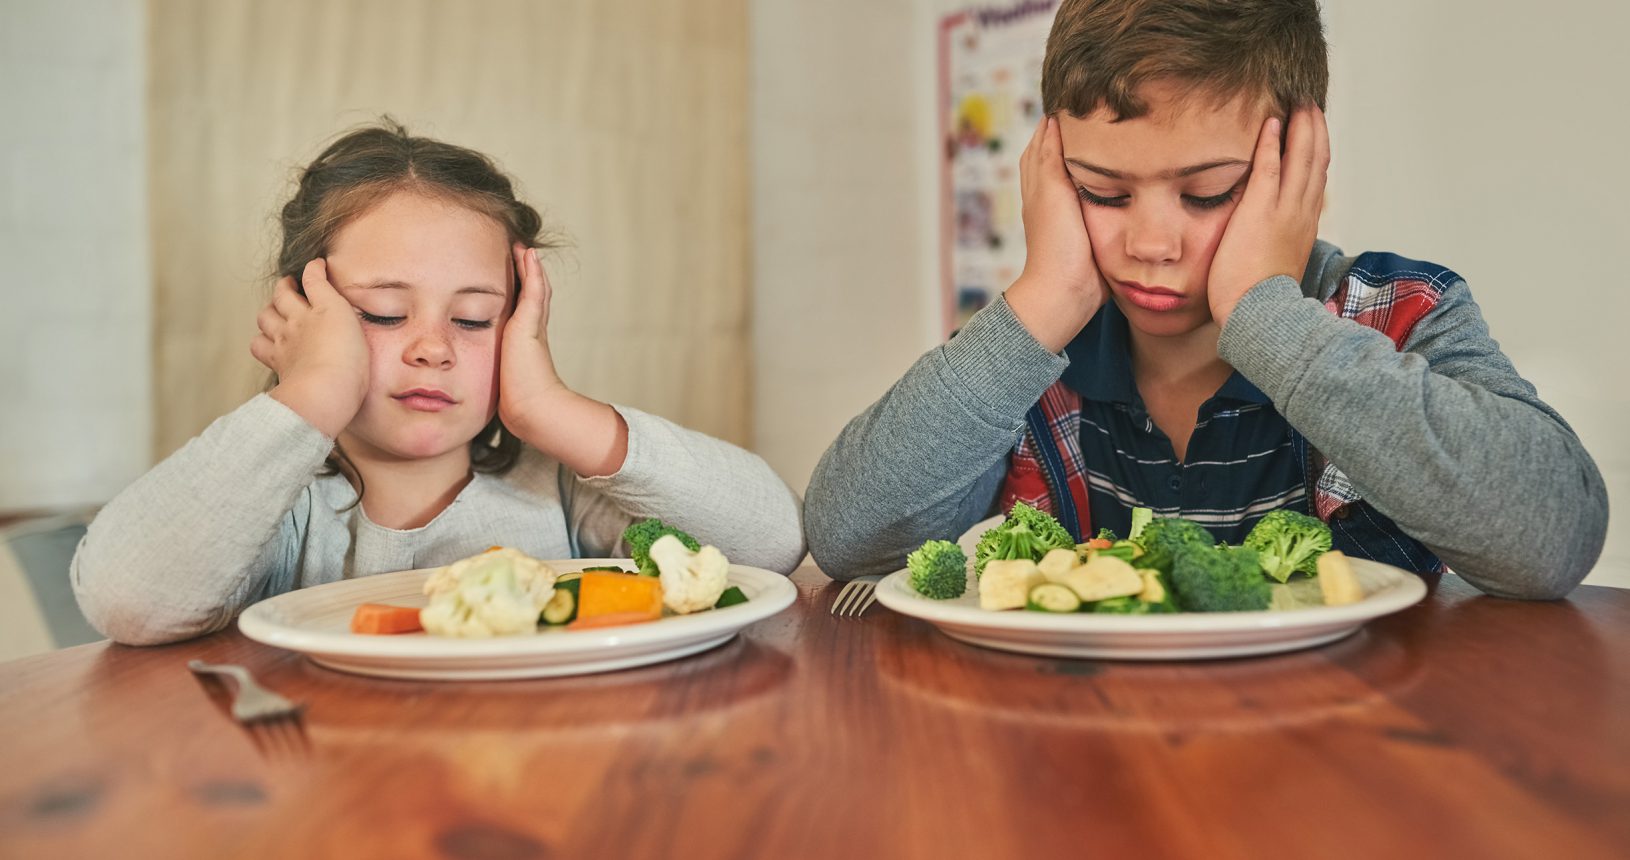 Wed rather go on a hunger strike. Cropped shot of two grumpy children refusing to eat their vegetables.